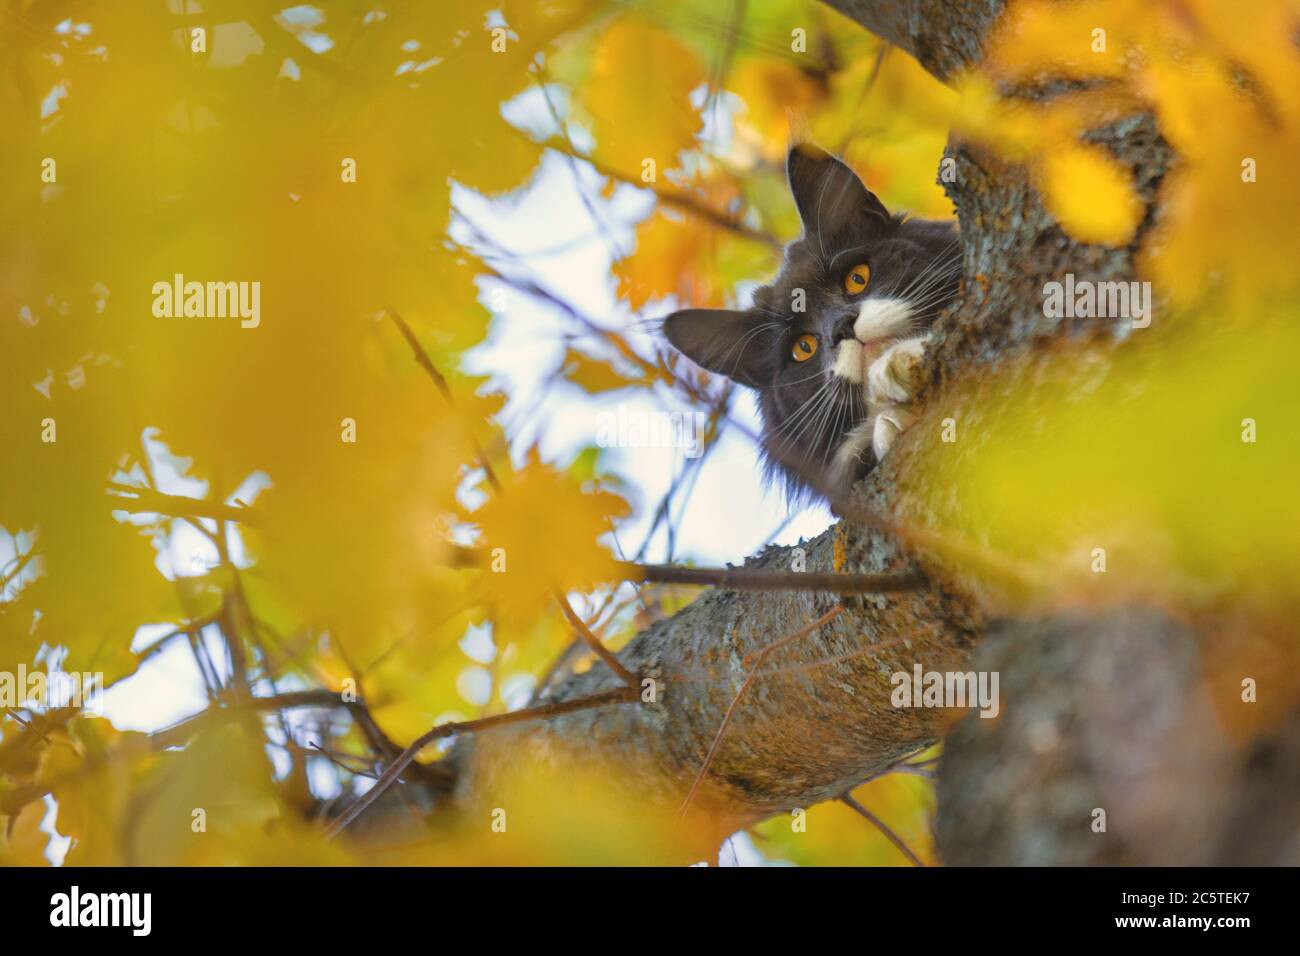 cat on a tree in yellow foliage. Save the cat from the tree. Stock Photo